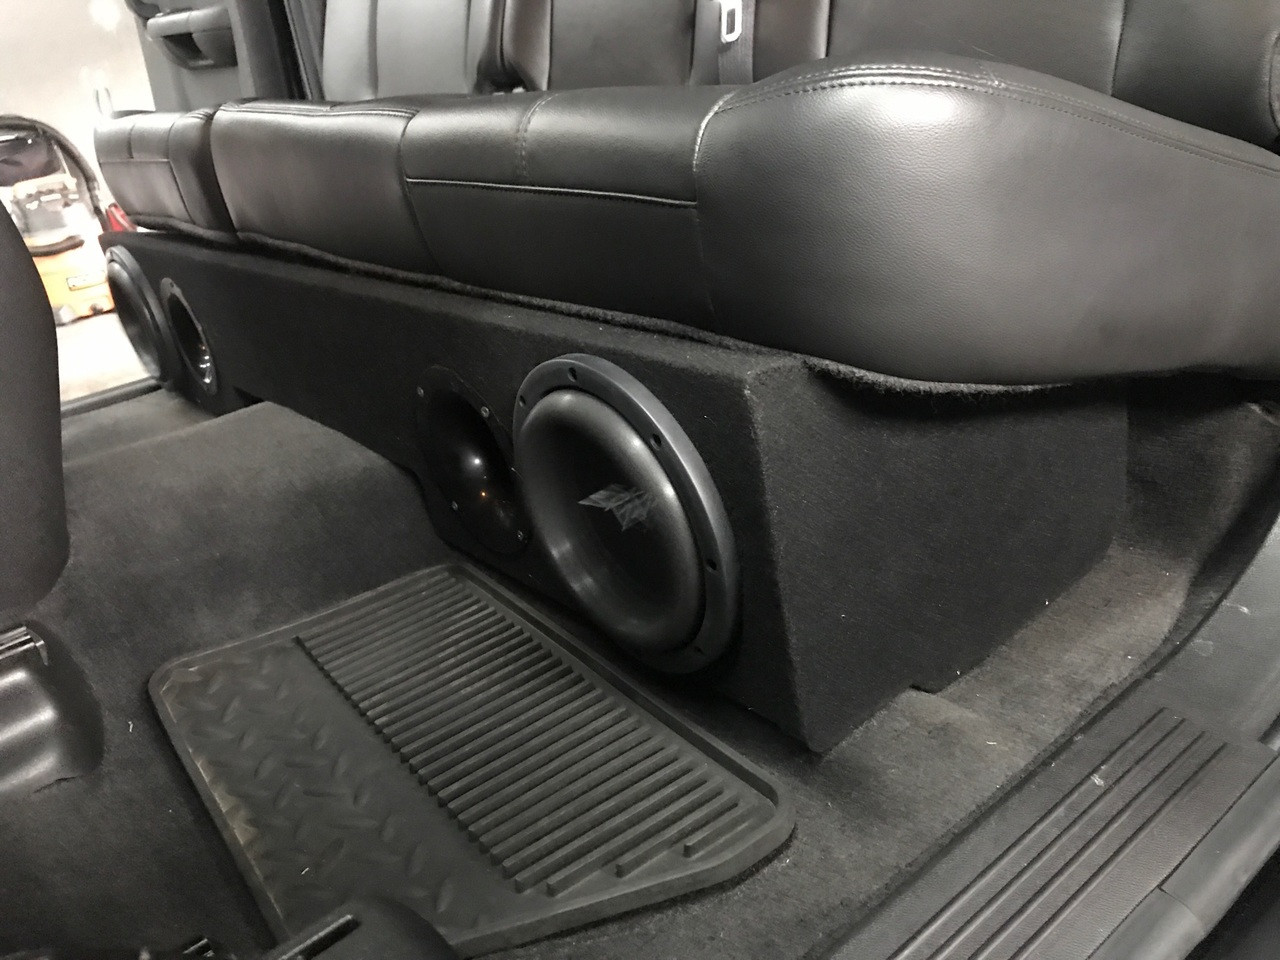 Compatible with 2007-2013 Chevy Silverado Ext Cab Truck Alpine Type S S-W12D2 Dual 12 Rhino Coated Sub Box Enclosure with S-A60M Amplifier & 4GA Amp Kit